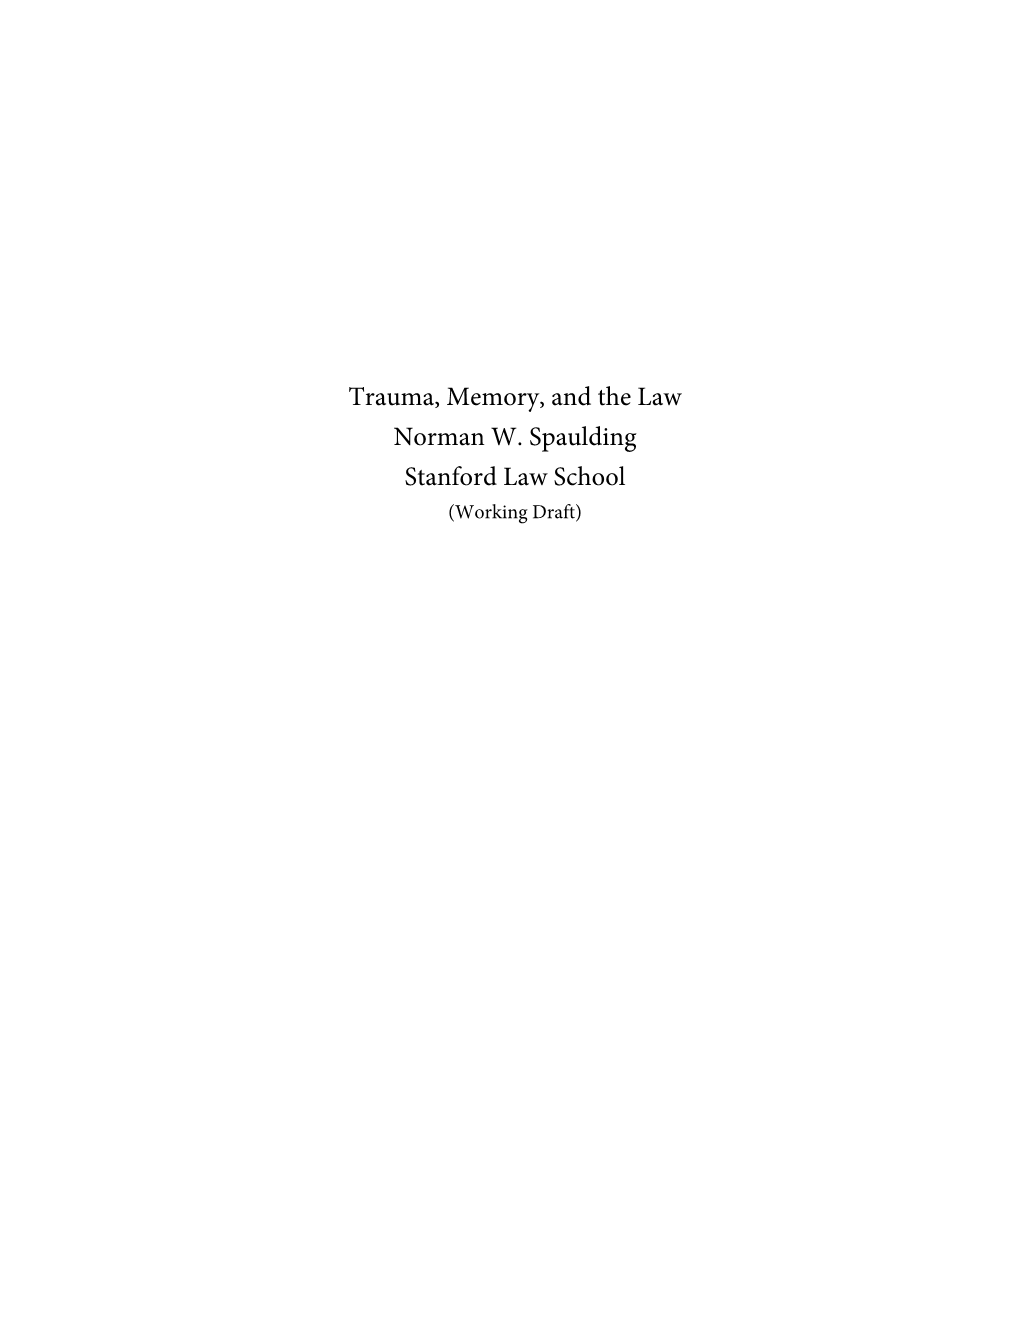 Trauma, Memory, and the Law Norman W. Spaulding Stanford Law School (Working Draft) Trauma, Memory, and the Law Norman W